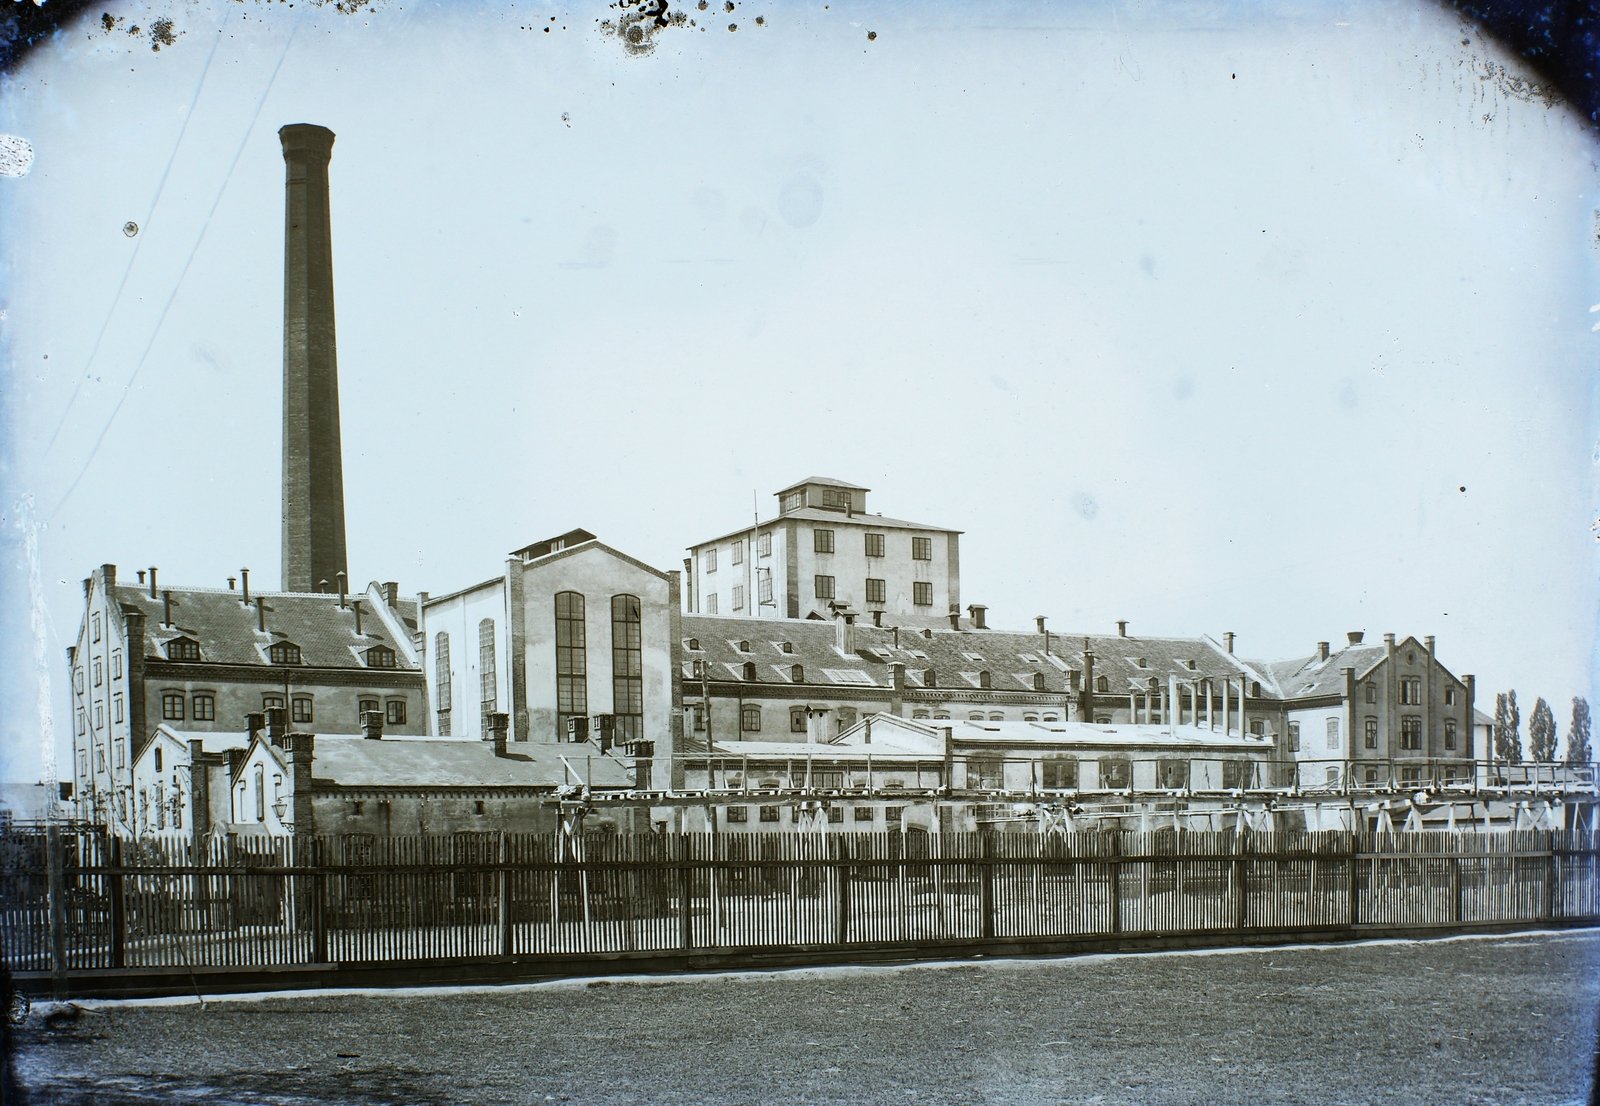 The former sugar factory